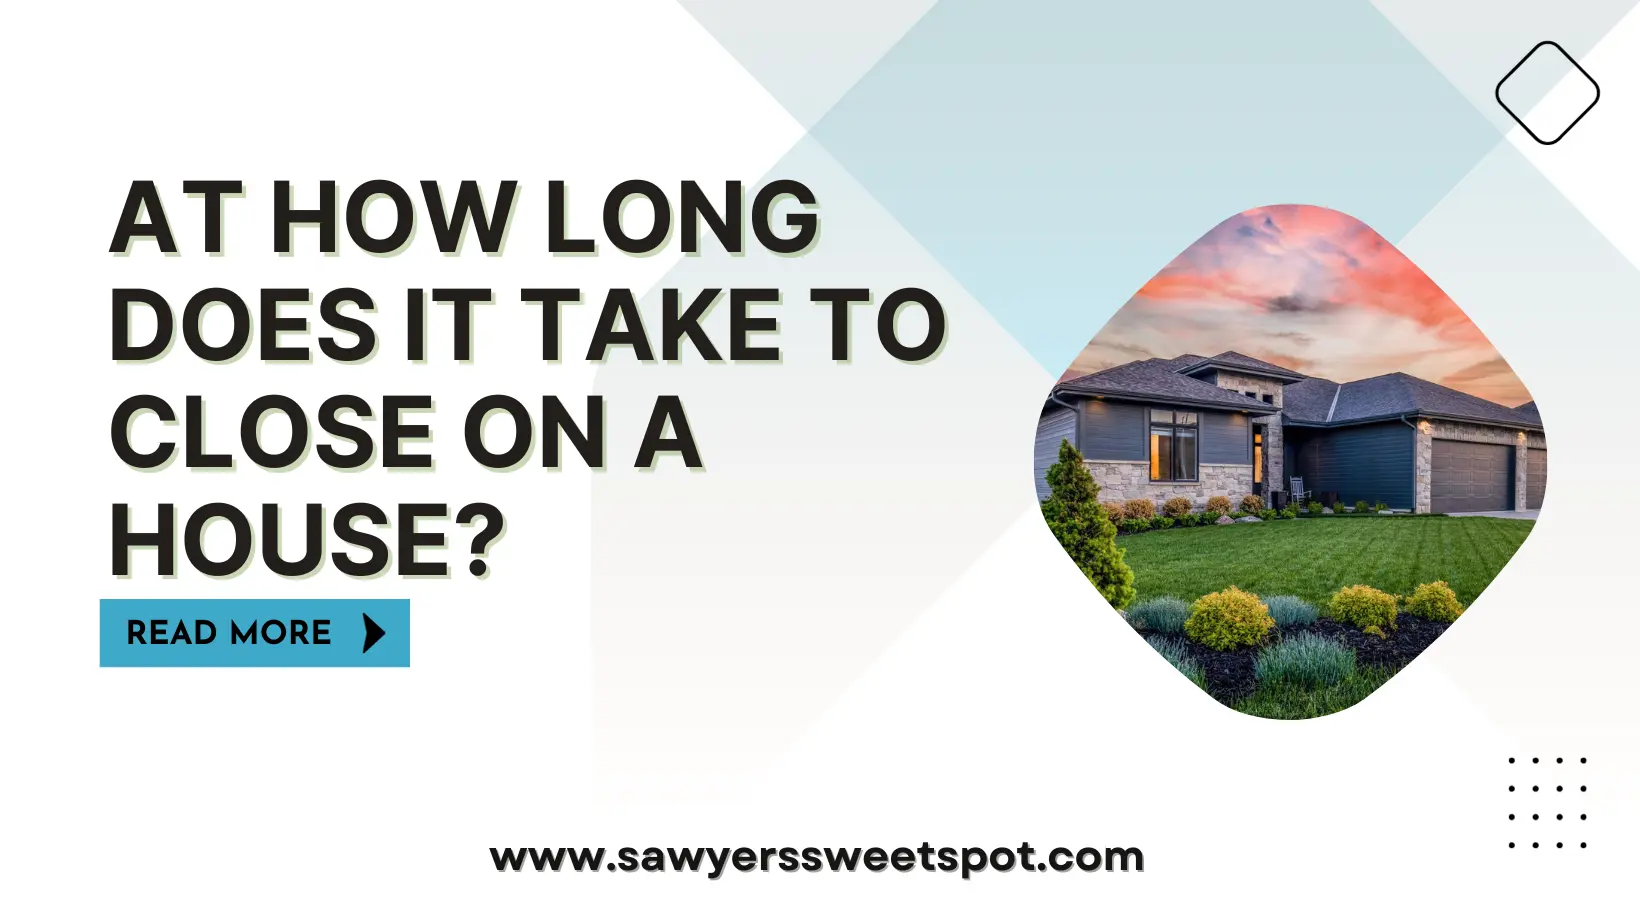 At How Long Does it Take to Close on a House?